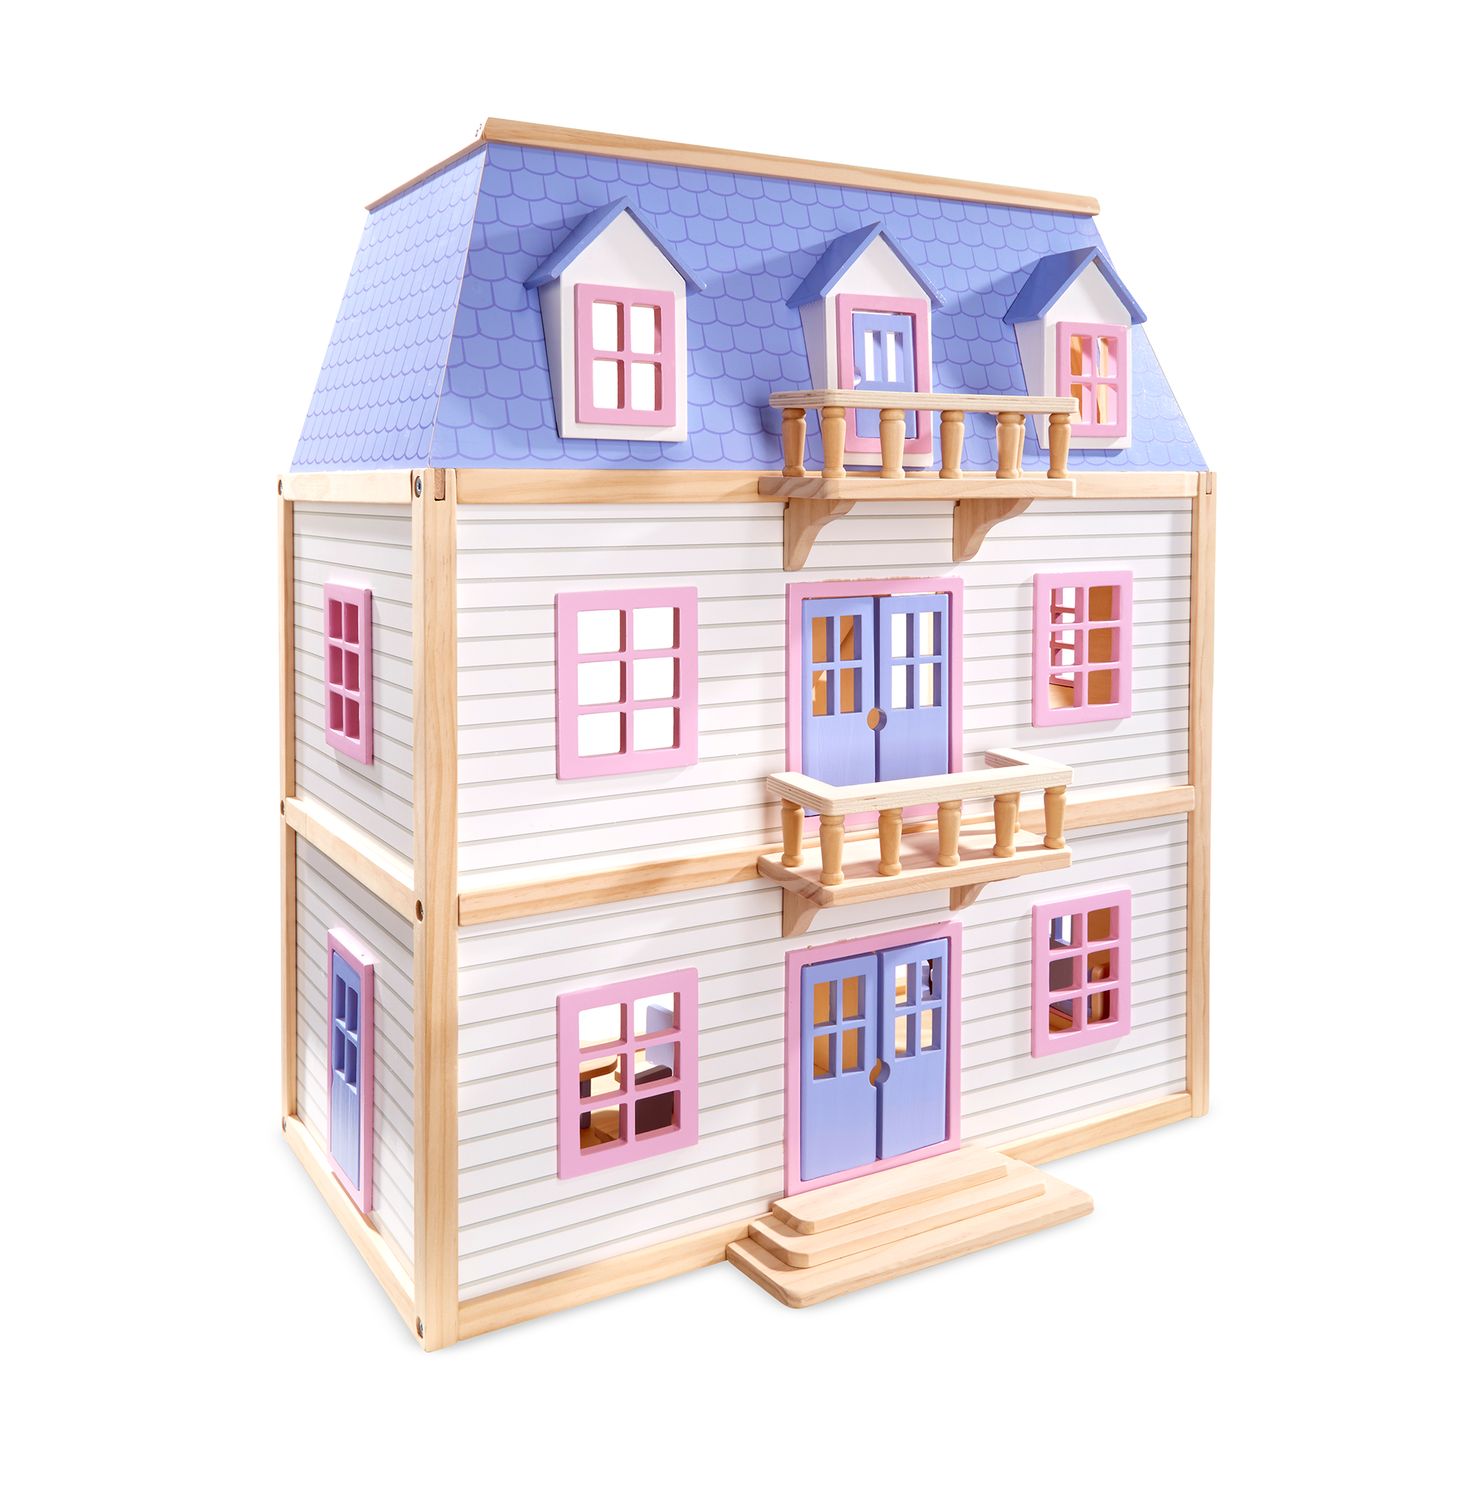 wooden doll house melissa and doug